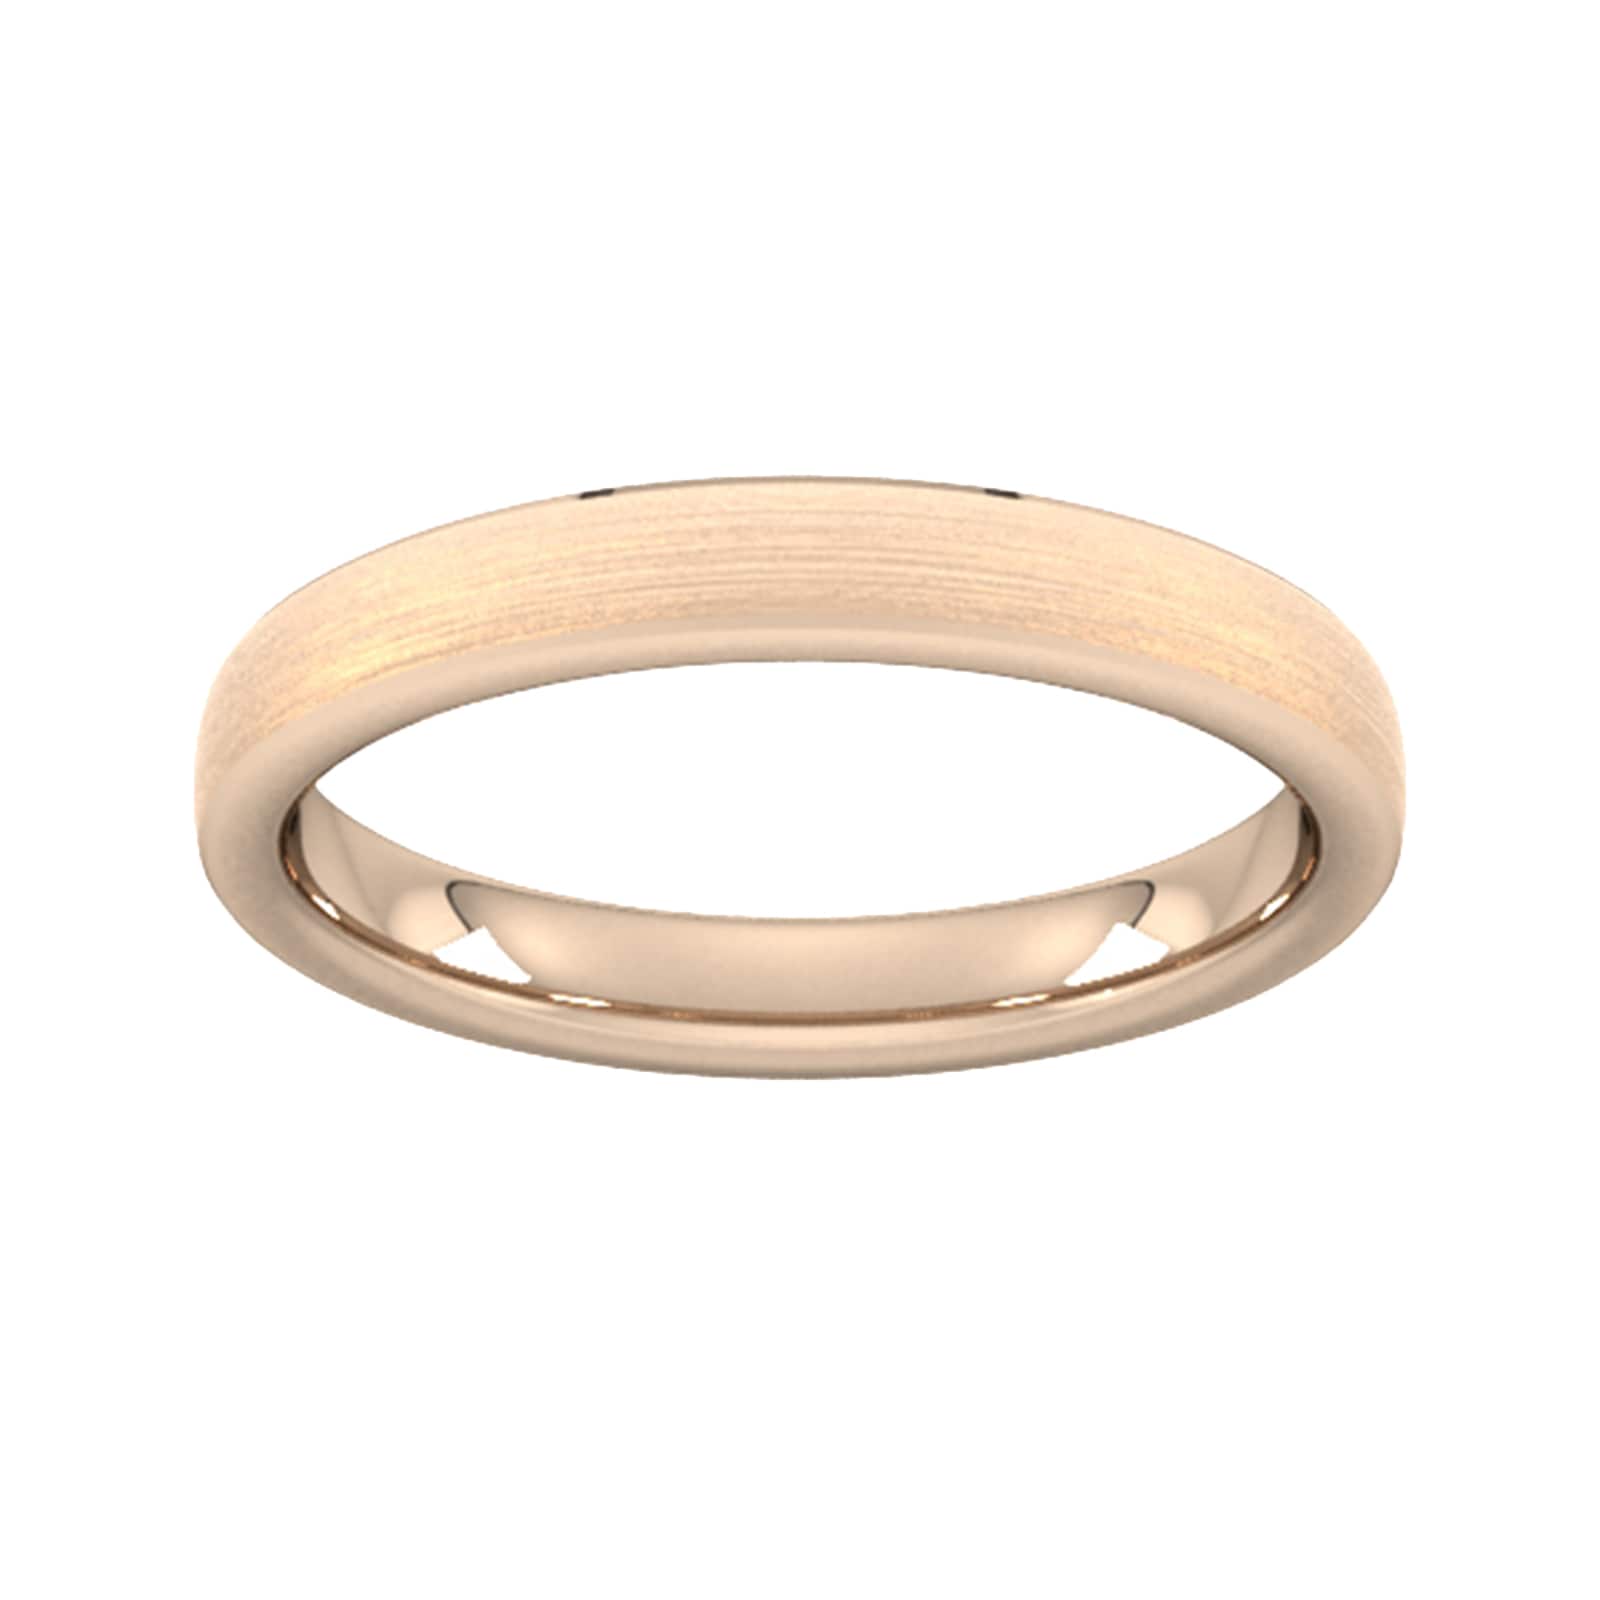 3mm Traditional Court Standard Polished Chamfered Edges With Matt Centre Wedding Ring In 18 Carat Rose Gold - Ring Size J